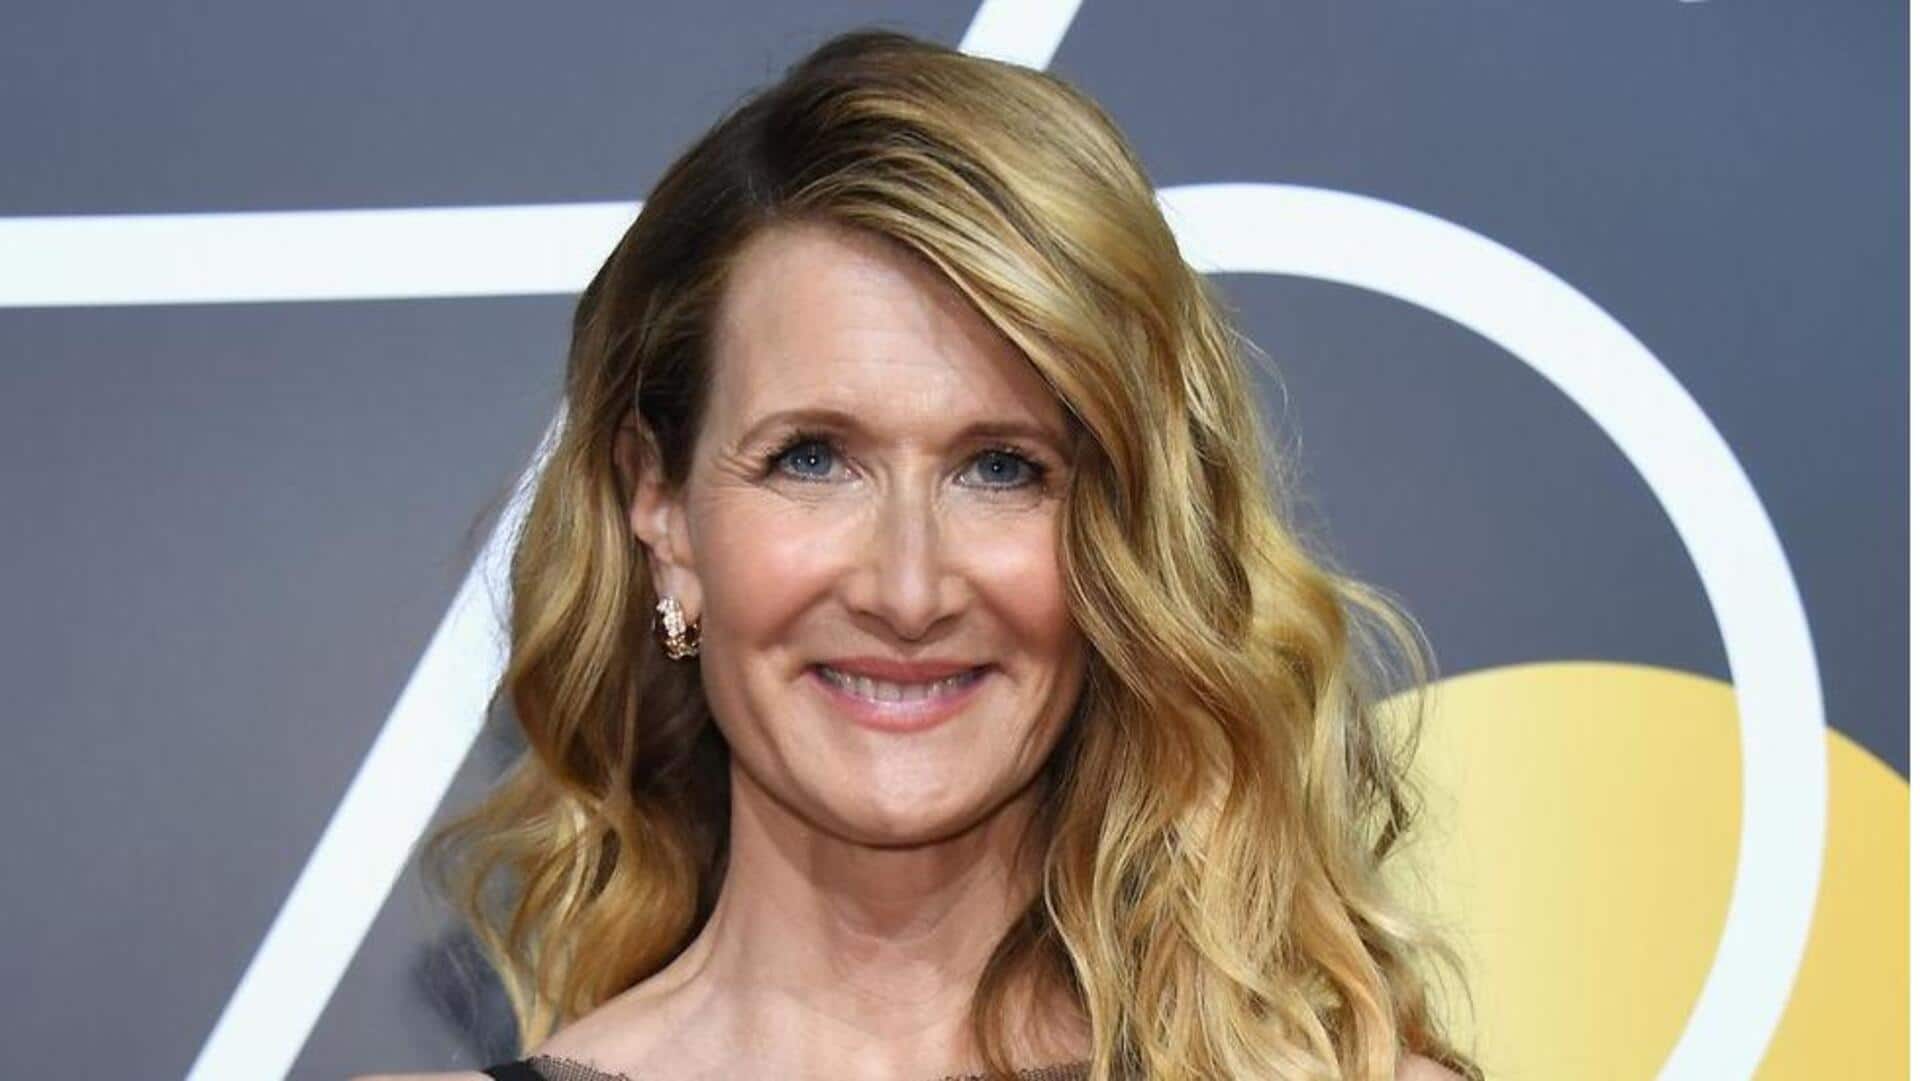 'Jurassic Park' to 'Marriage Story': Laura Dern's best roles 